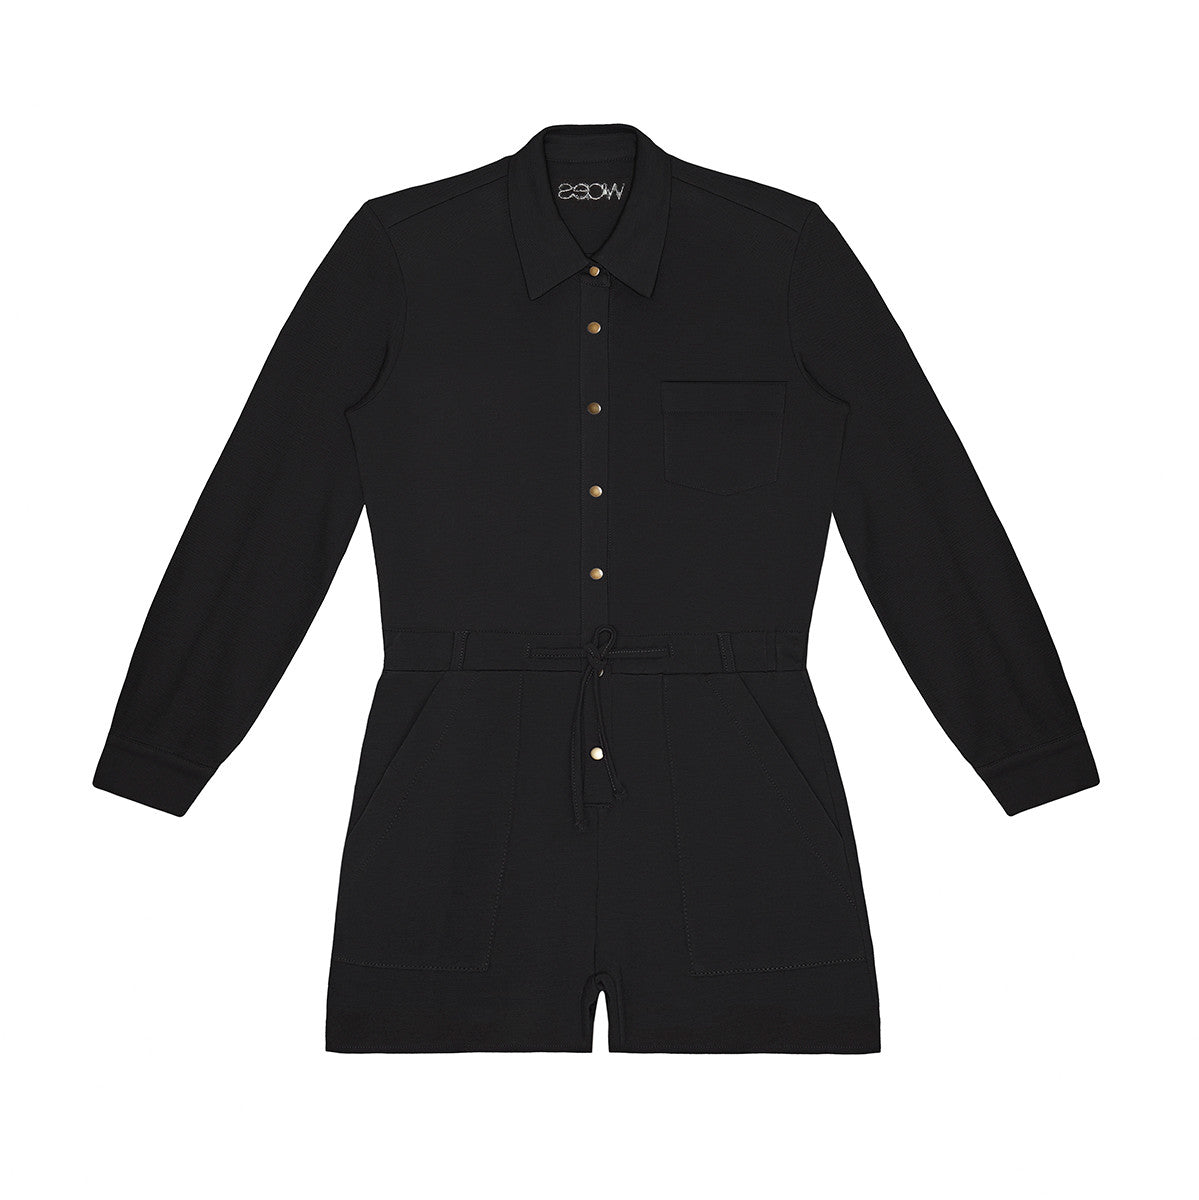 The Little Hedonist black denim playsuit has a lapel collar and shirt sleeves. Casual but office appropriate contemporary-chic at the same time. Pockets in front and in the back. Metal buttons as a closure on the front.